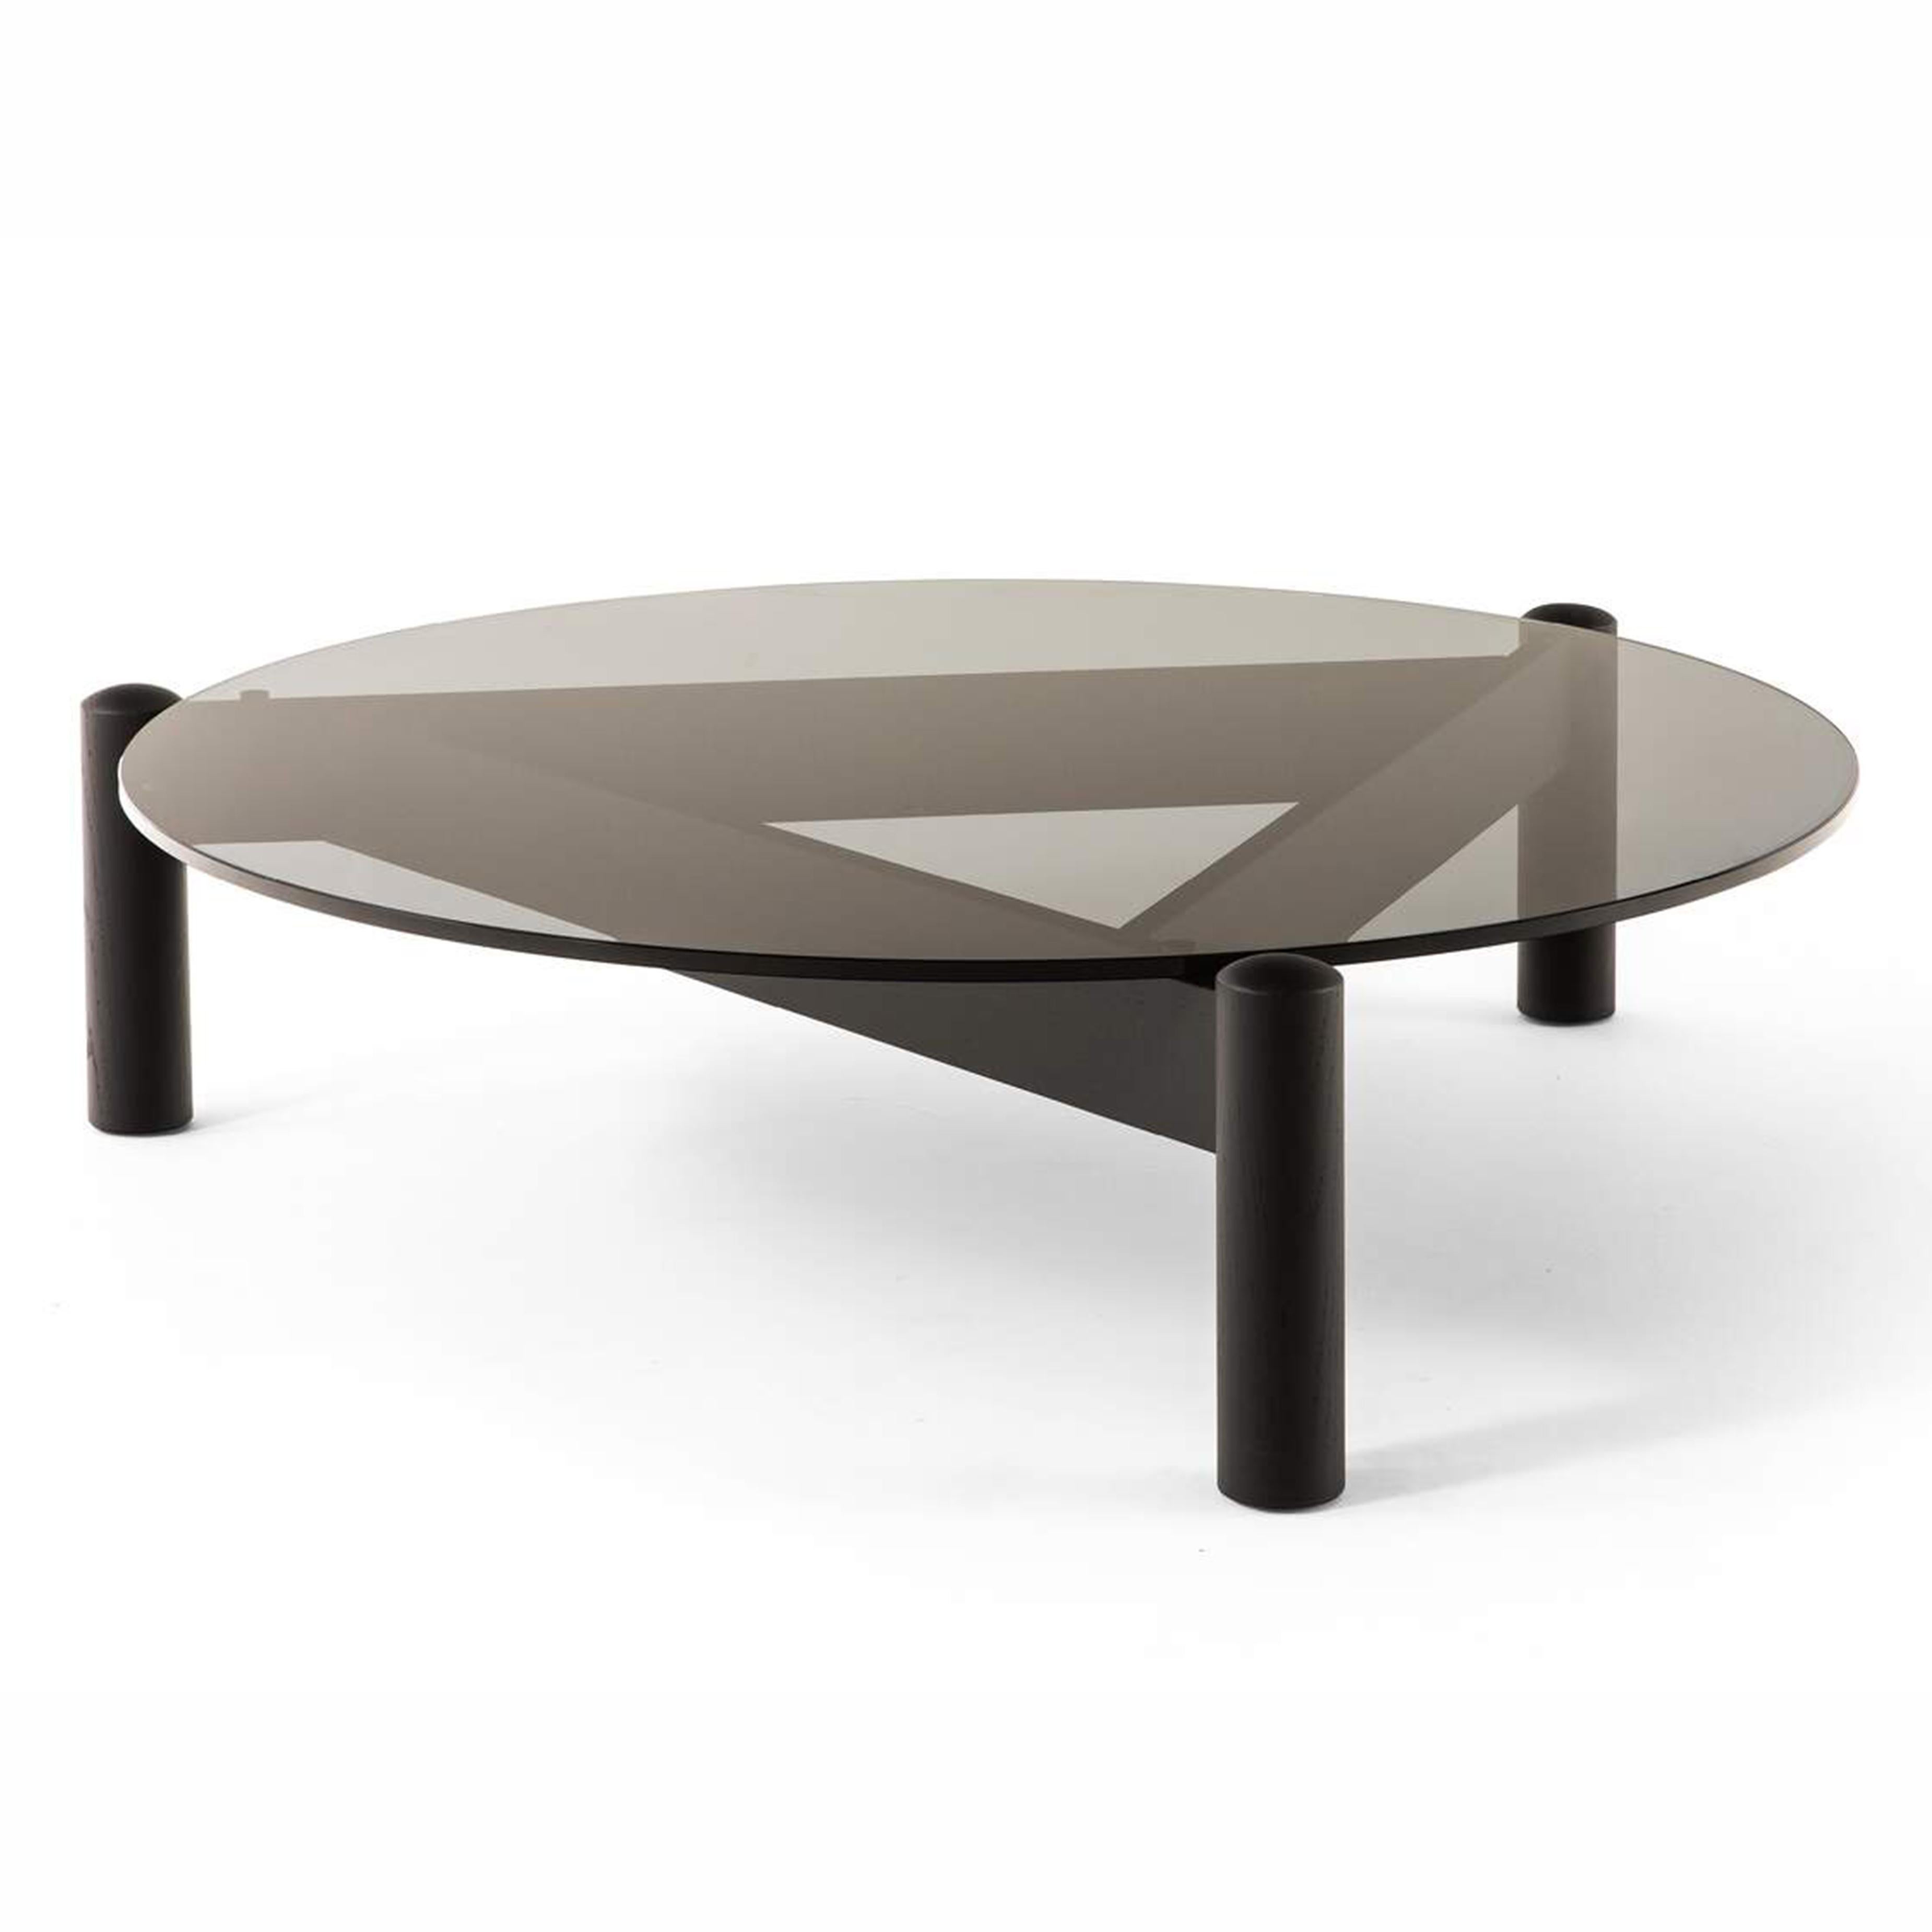 Table designed by Charlotte Perriand in 1937. Relaunched in 2019.
Manufactured by Cassina in Italy.

The first model of this historic design low table was crafted in 1937 for Charlotte Perriand’s studio in Montparnasse.

The first example of